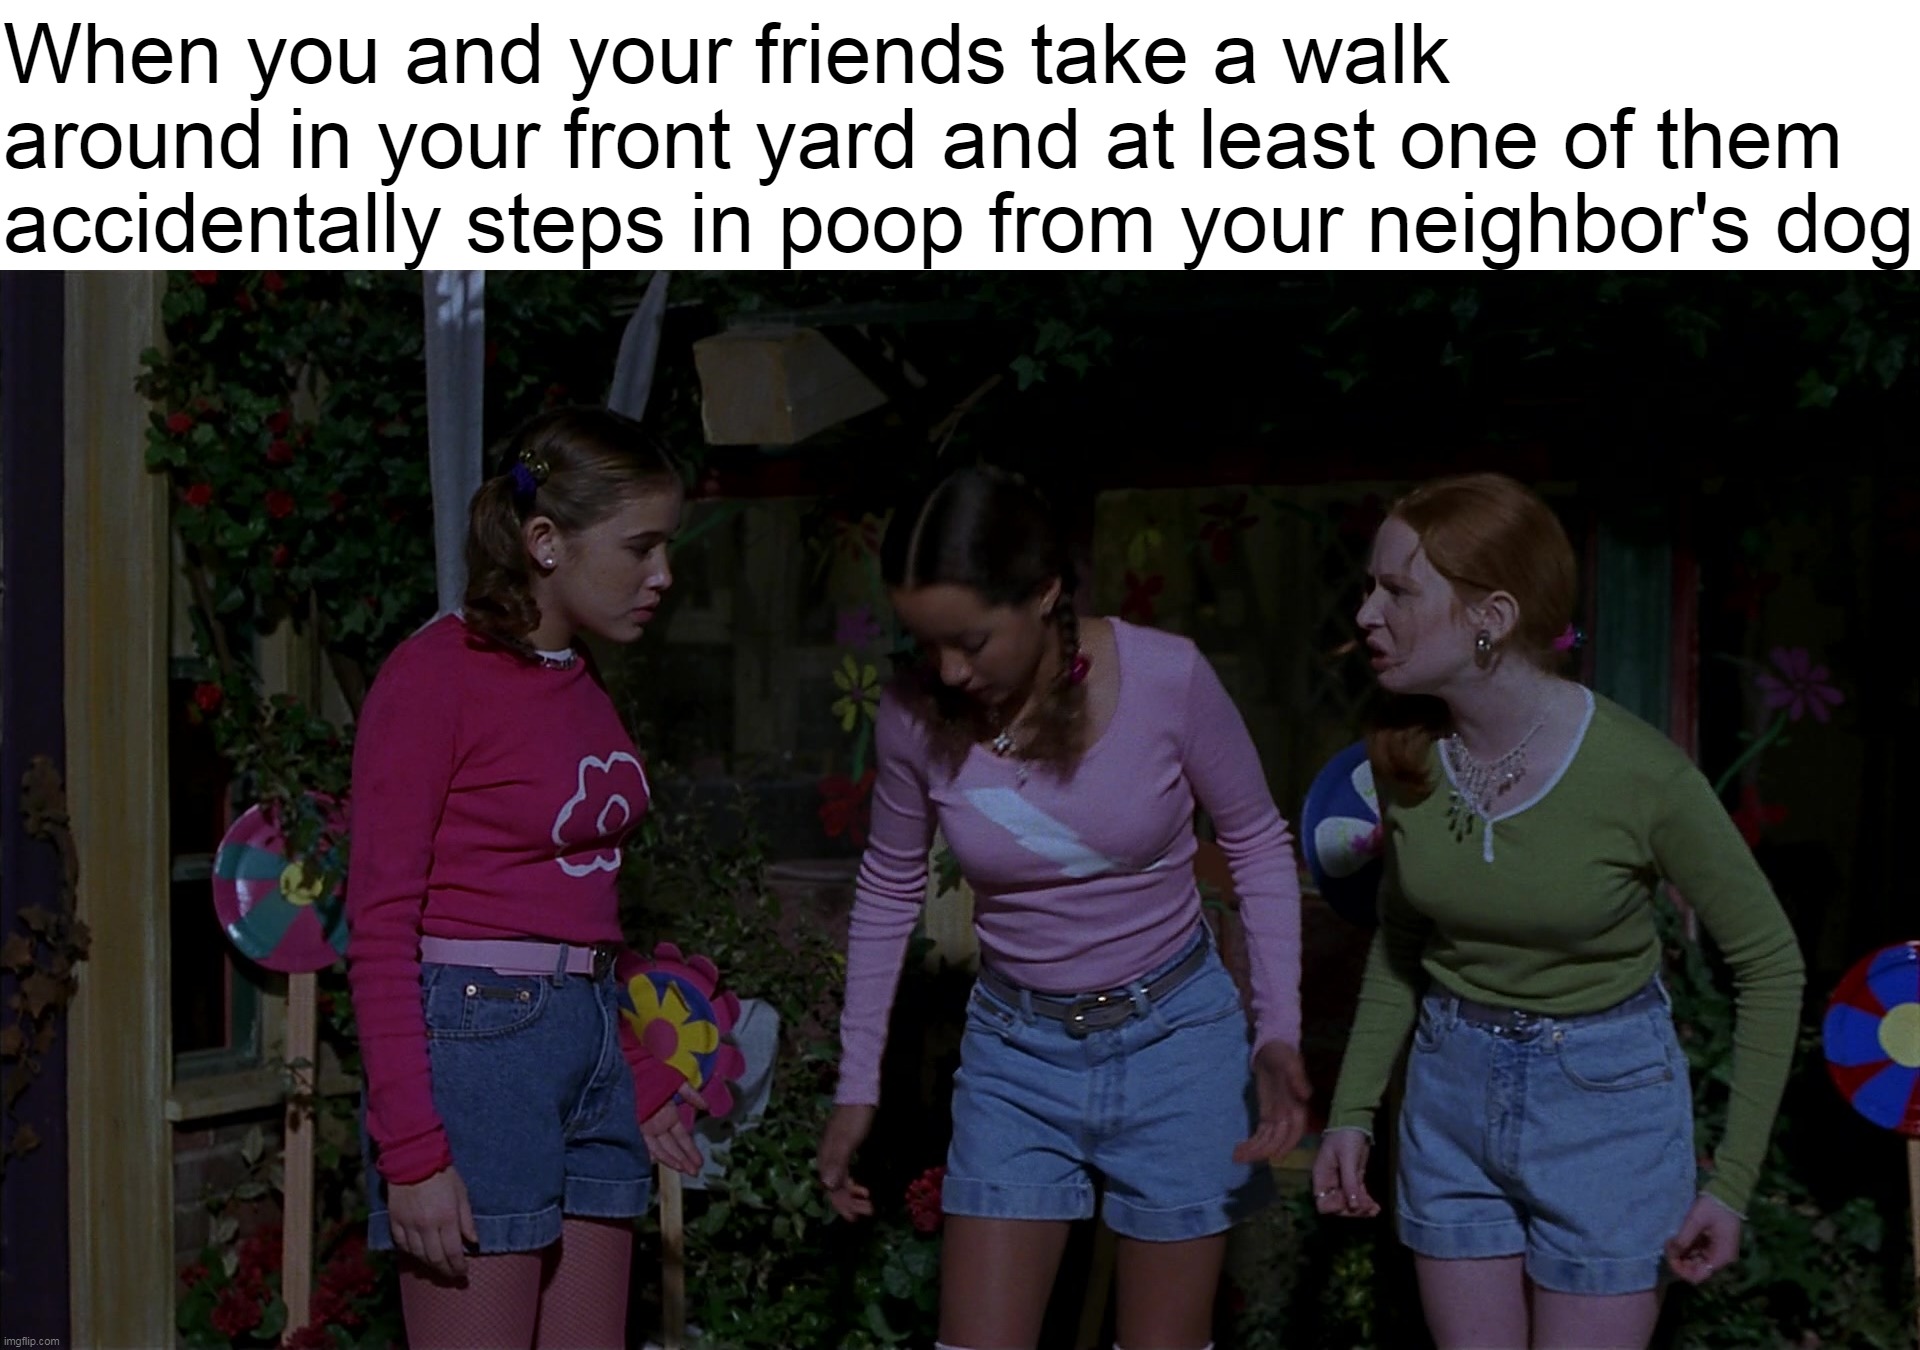 There Went That New Pair of Shoes | When you and your friends take a walk around in your front yard and at least one of them accidentally steps in poop from your neighbor's dog | image tagged in meme,memes,humor,relatable | made w/ Imgflip meme maker